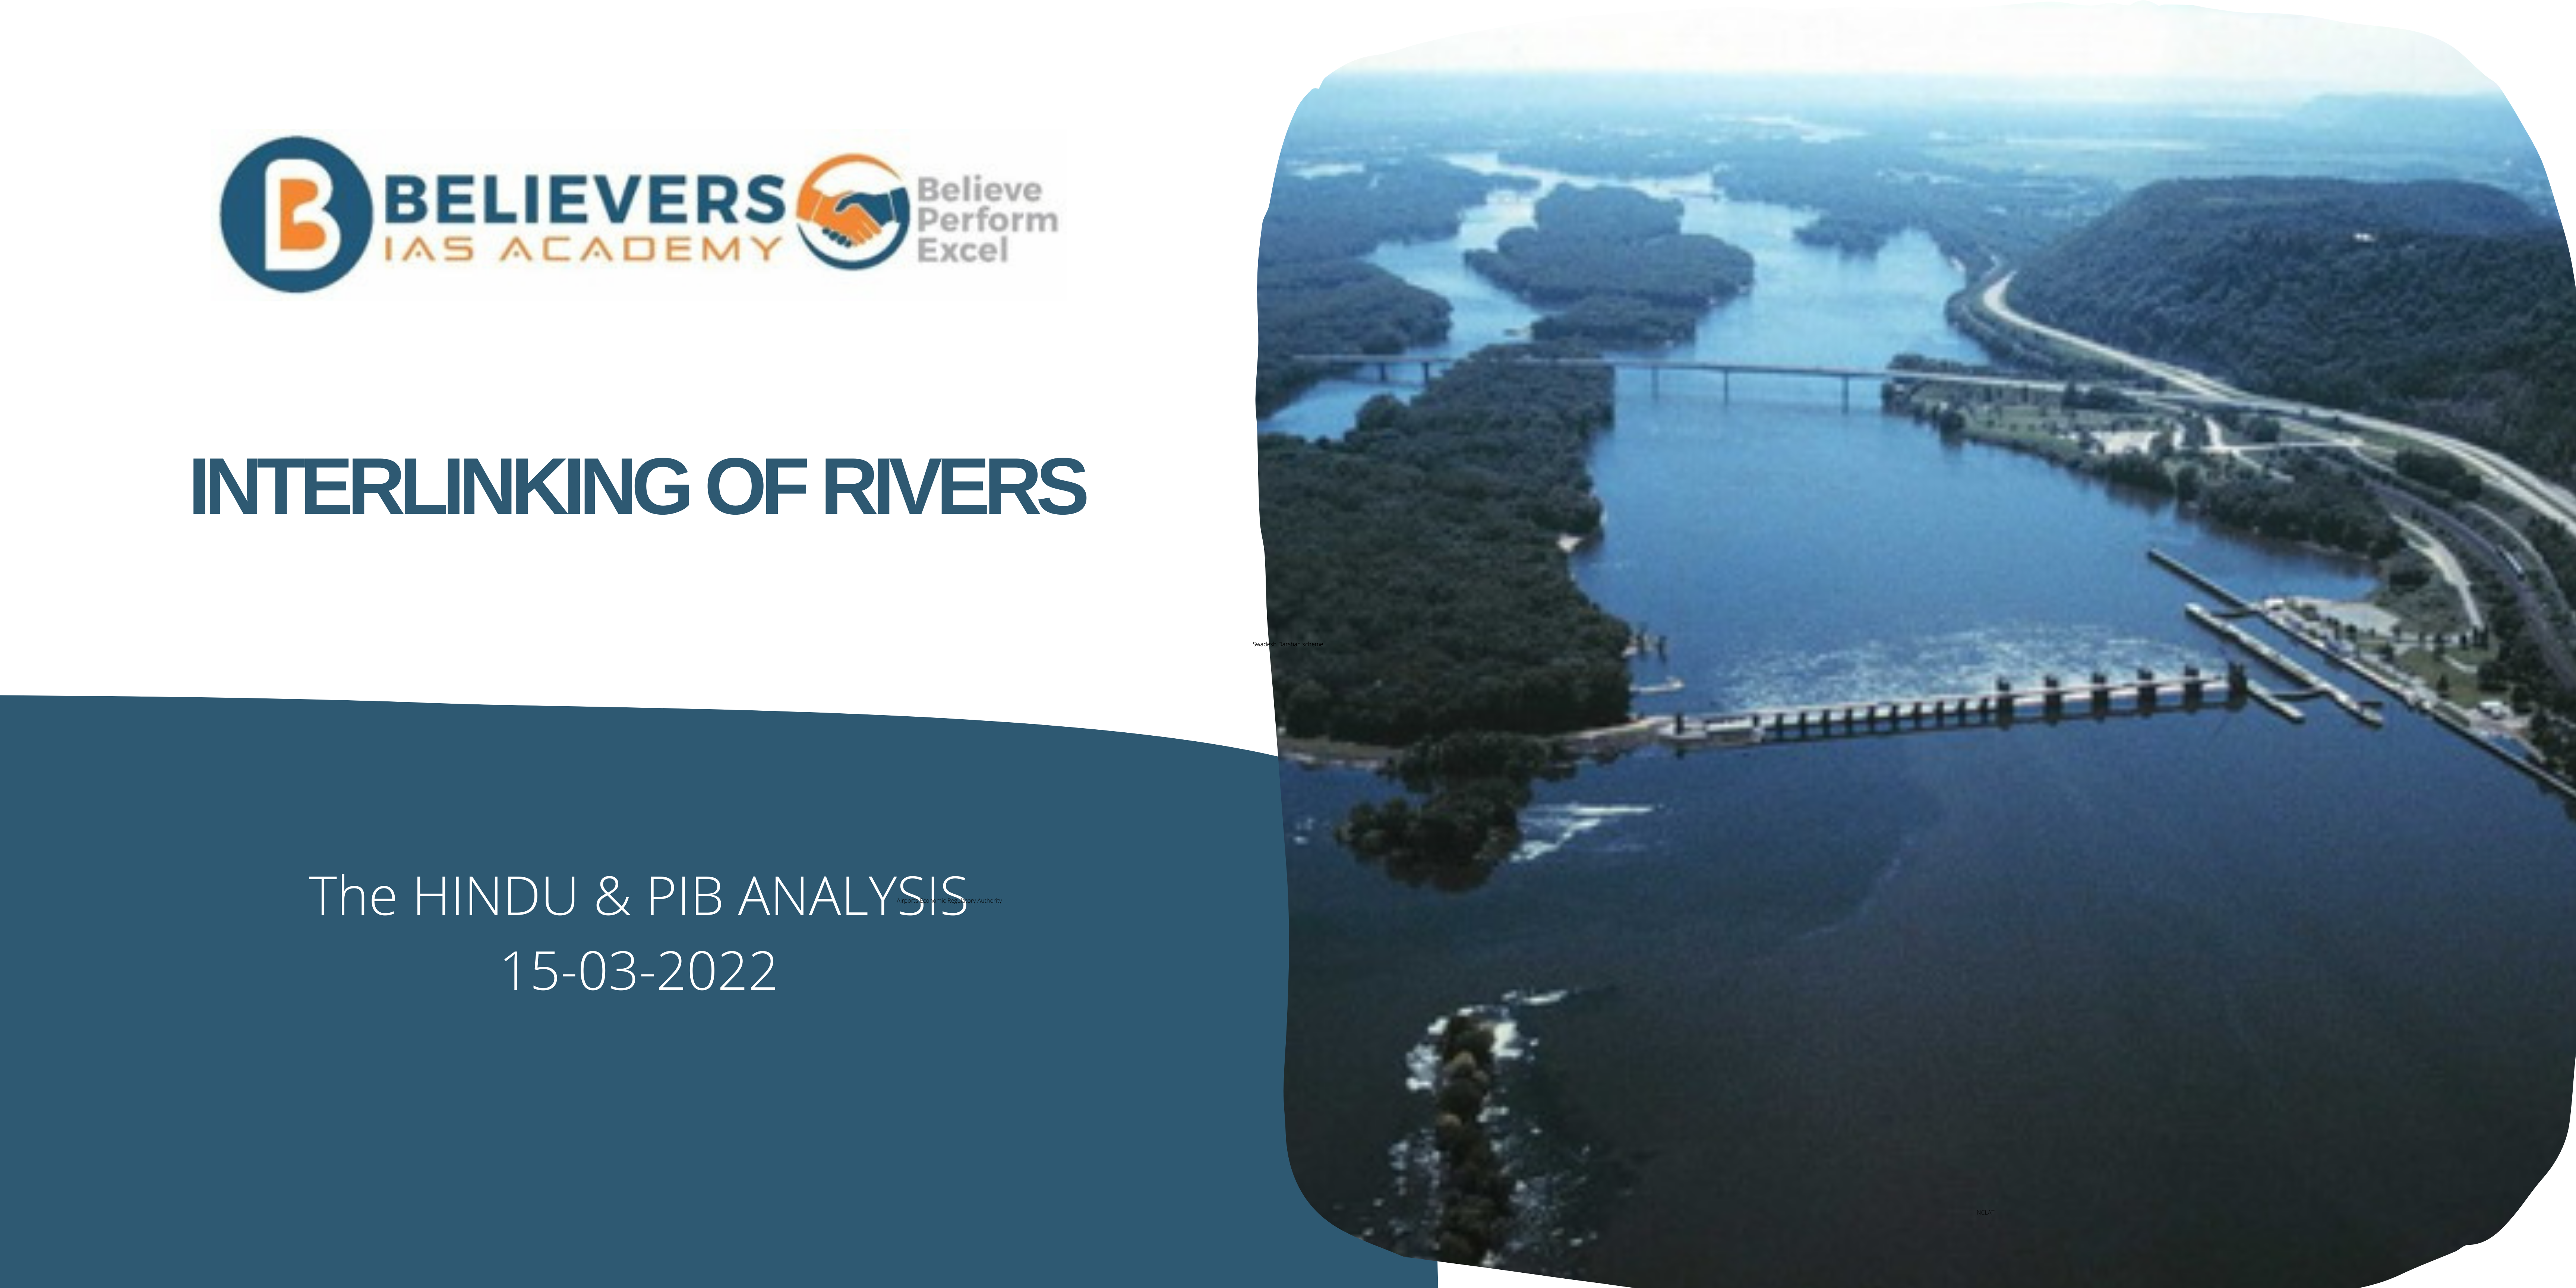 UPSC Current affairs - Interlinking of Rivers